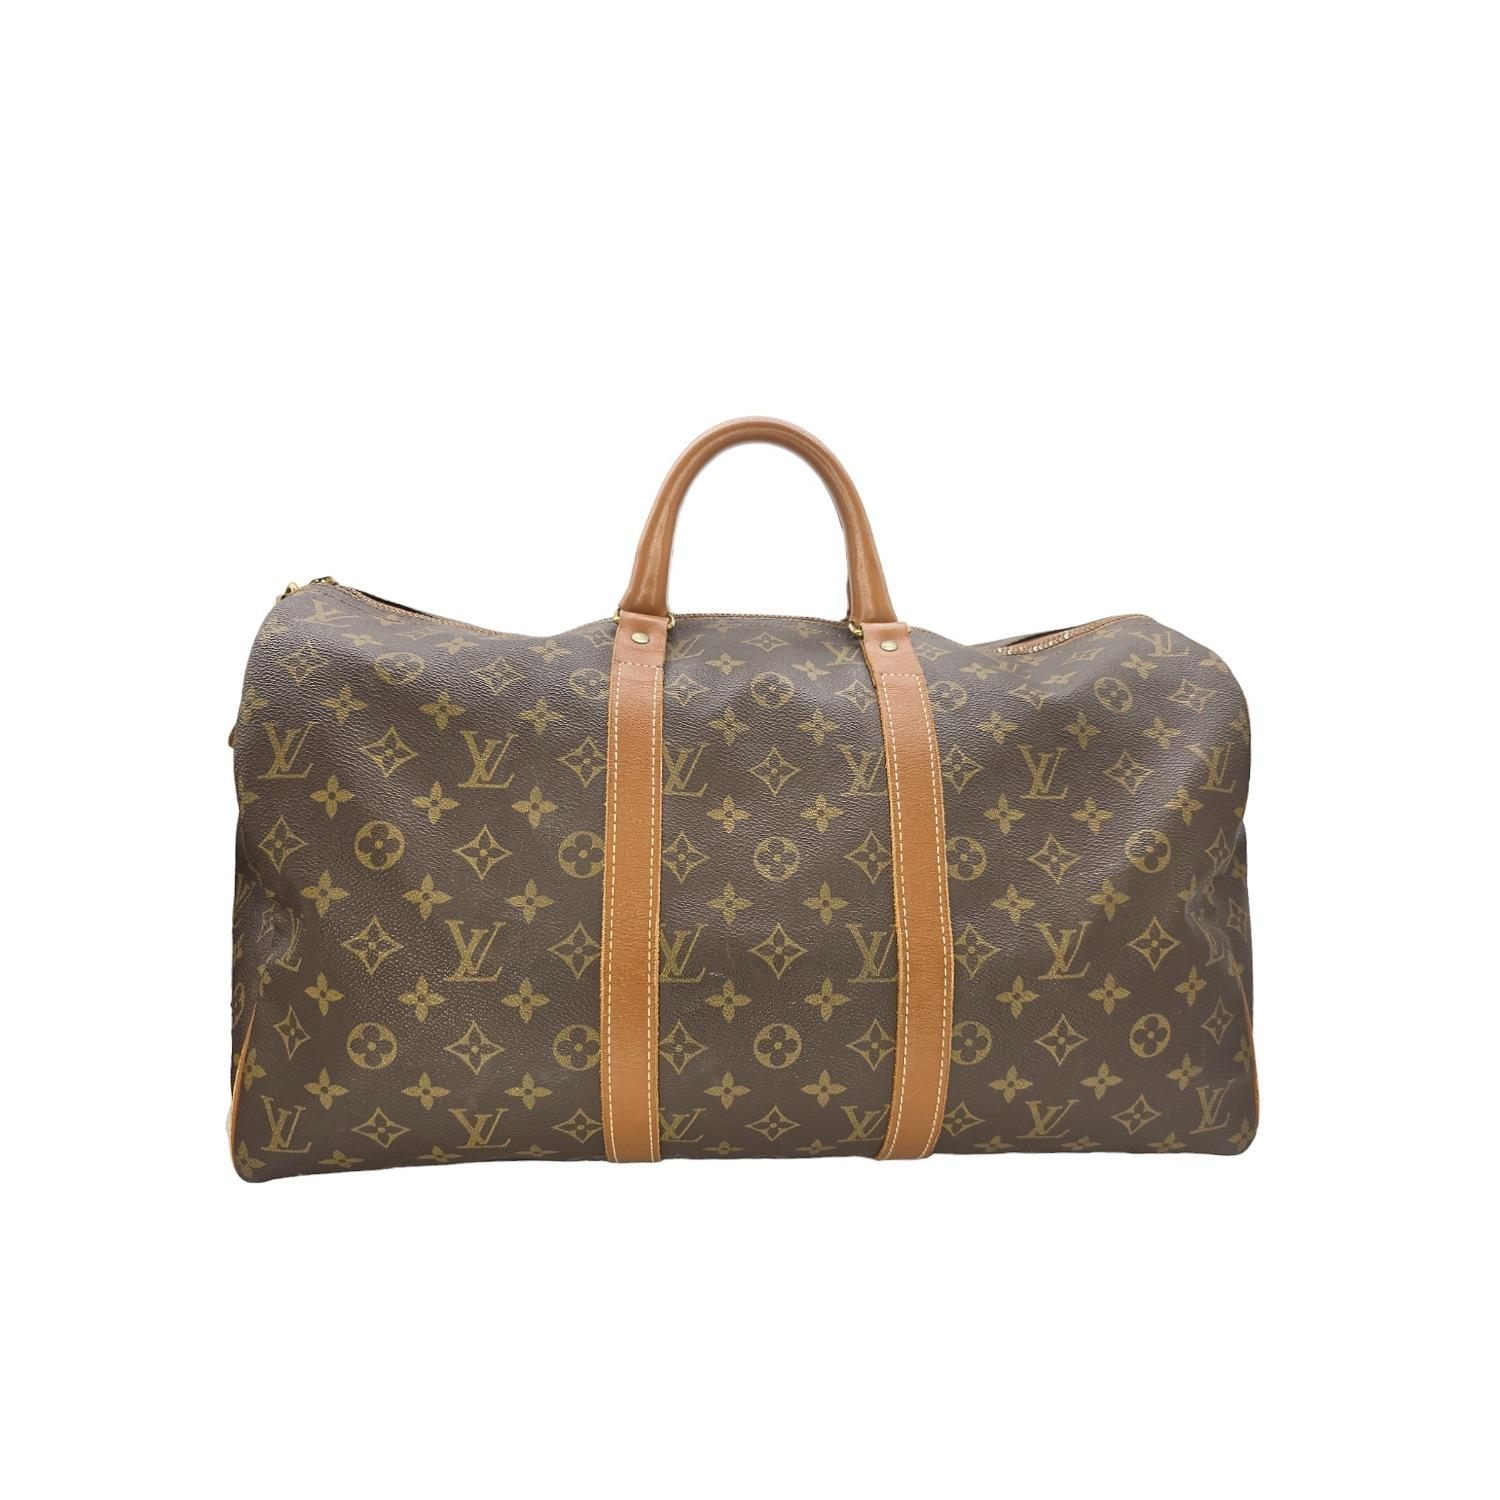 The Louis Vuitton Monogram Keepall 45 Bag, designed by the French Company in the 70s, exudes vintage charm. Made with high-quality monogram canvas and leather trim and accented with golden brass hardware, this bag is both stylish and durable. The